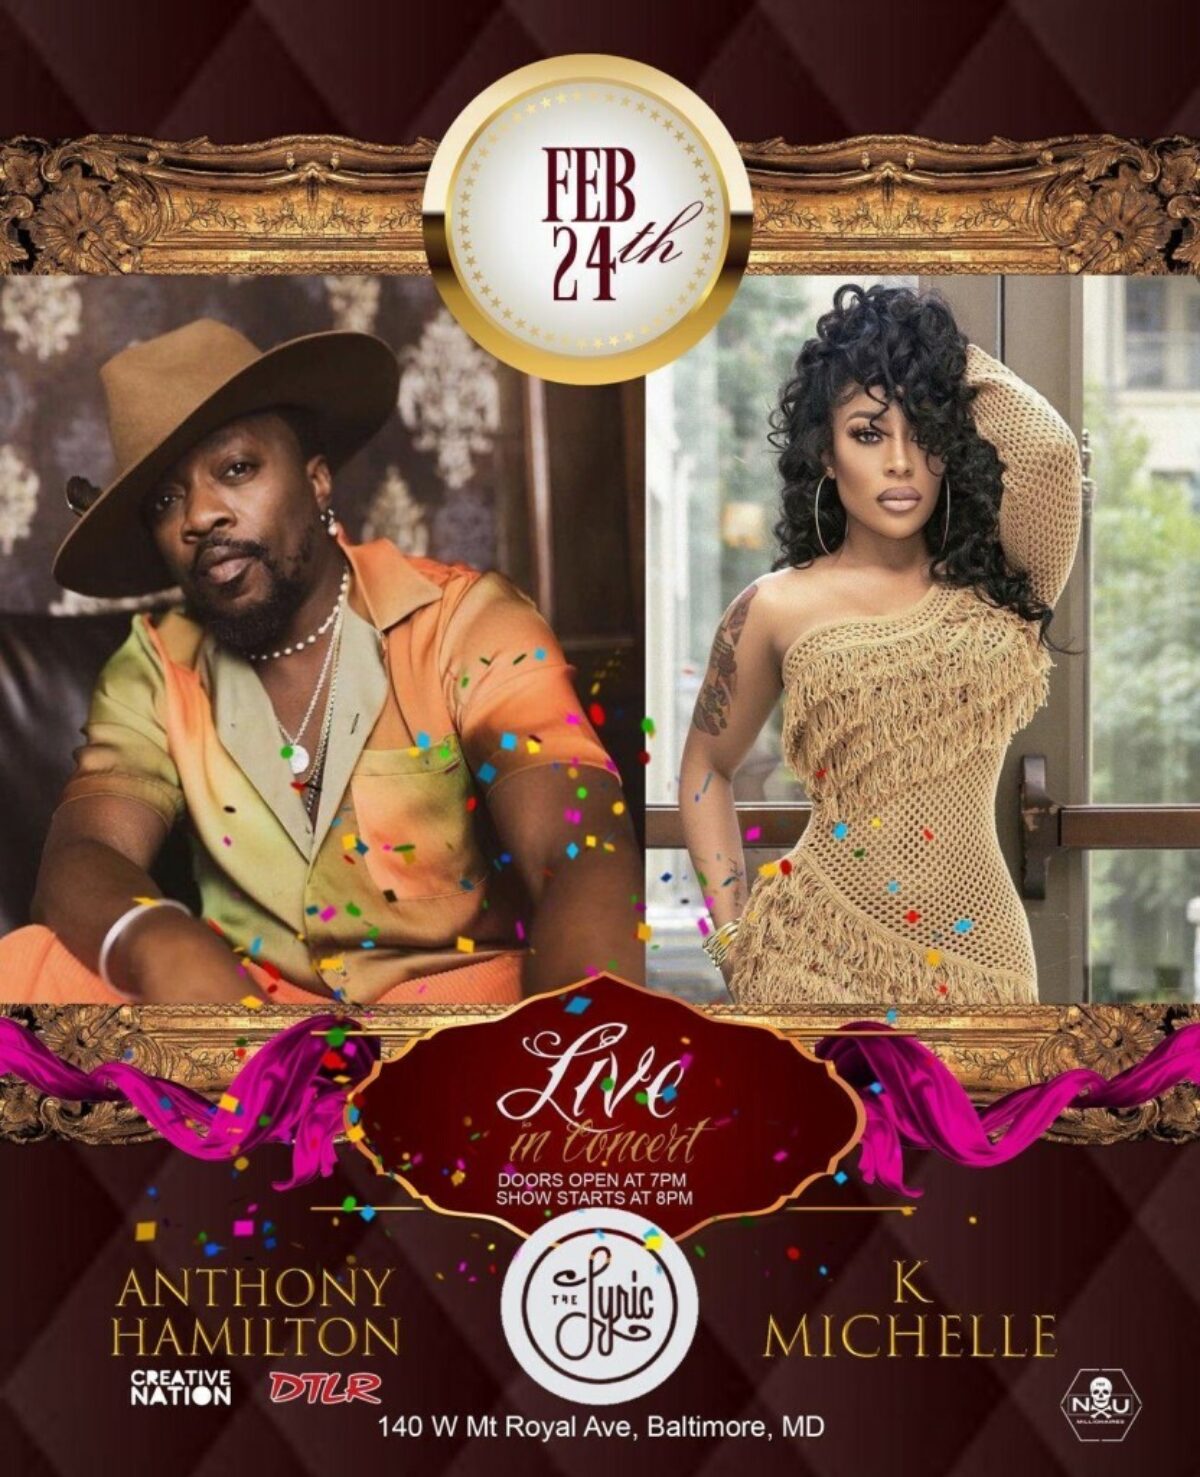 Anthony Hamilton and K Michelle at the Lyric